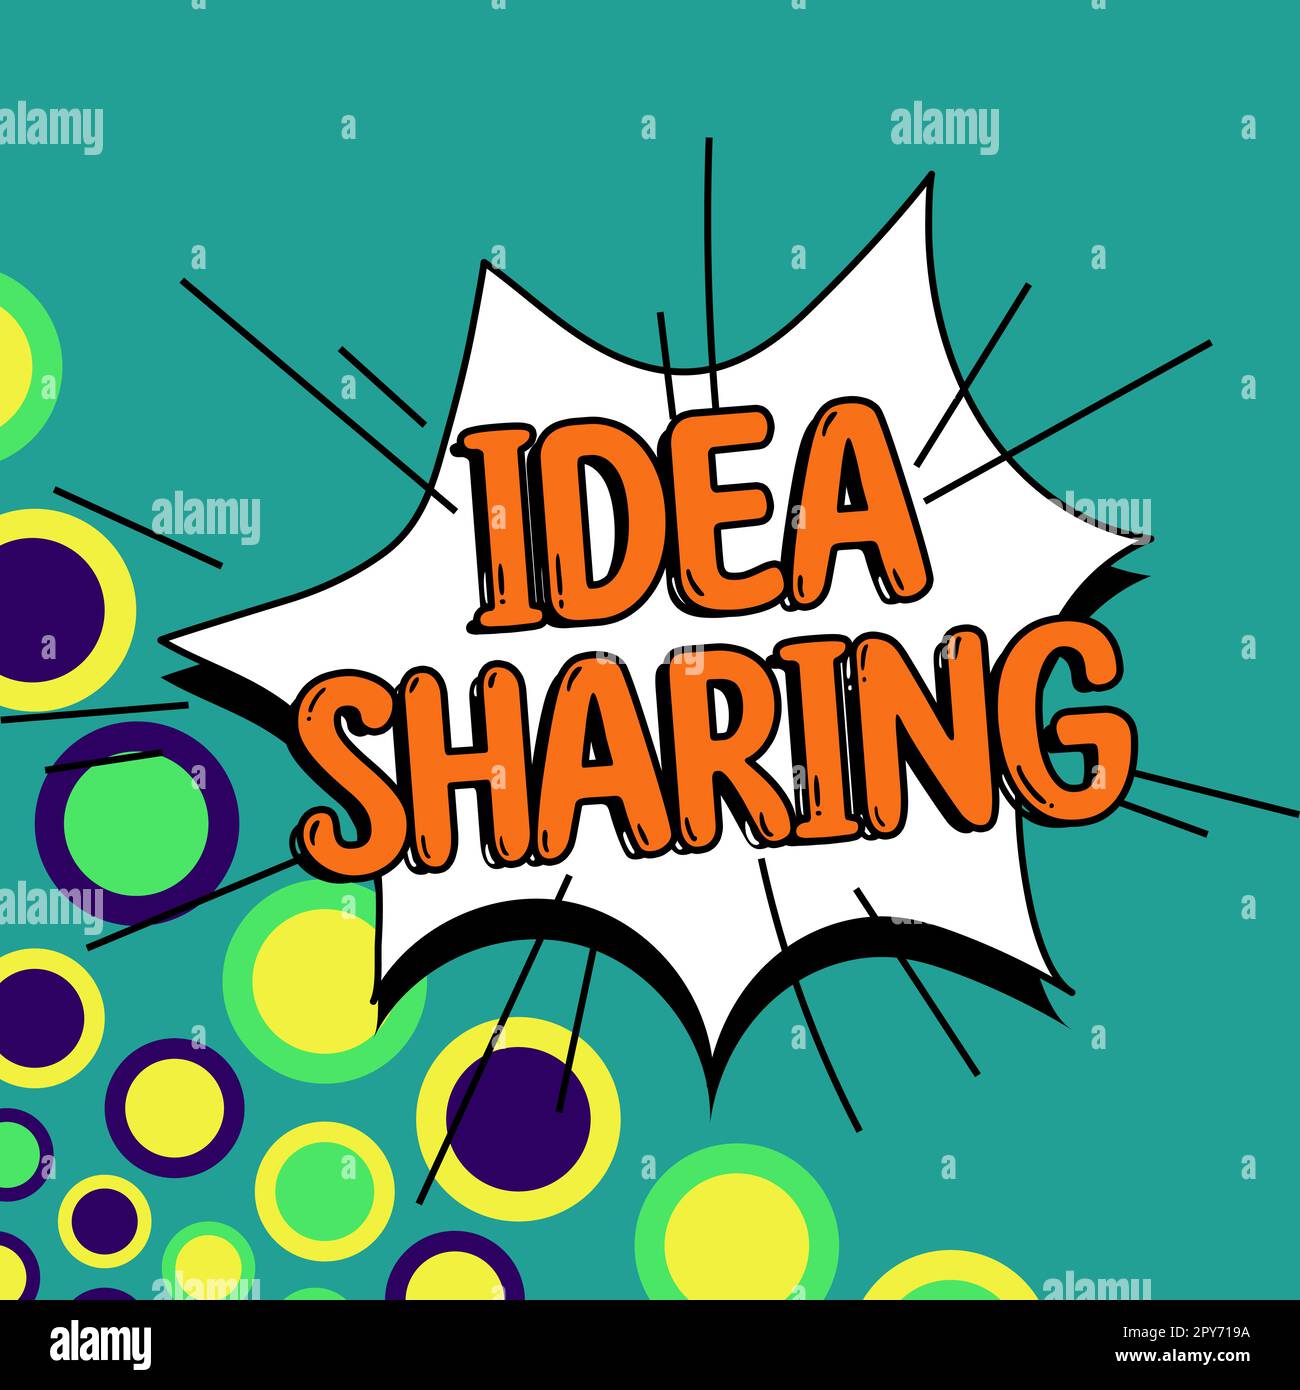 Sign displaying Idea Sharing. Business concept Startup launch innovation product, creative thinking Stock Photo